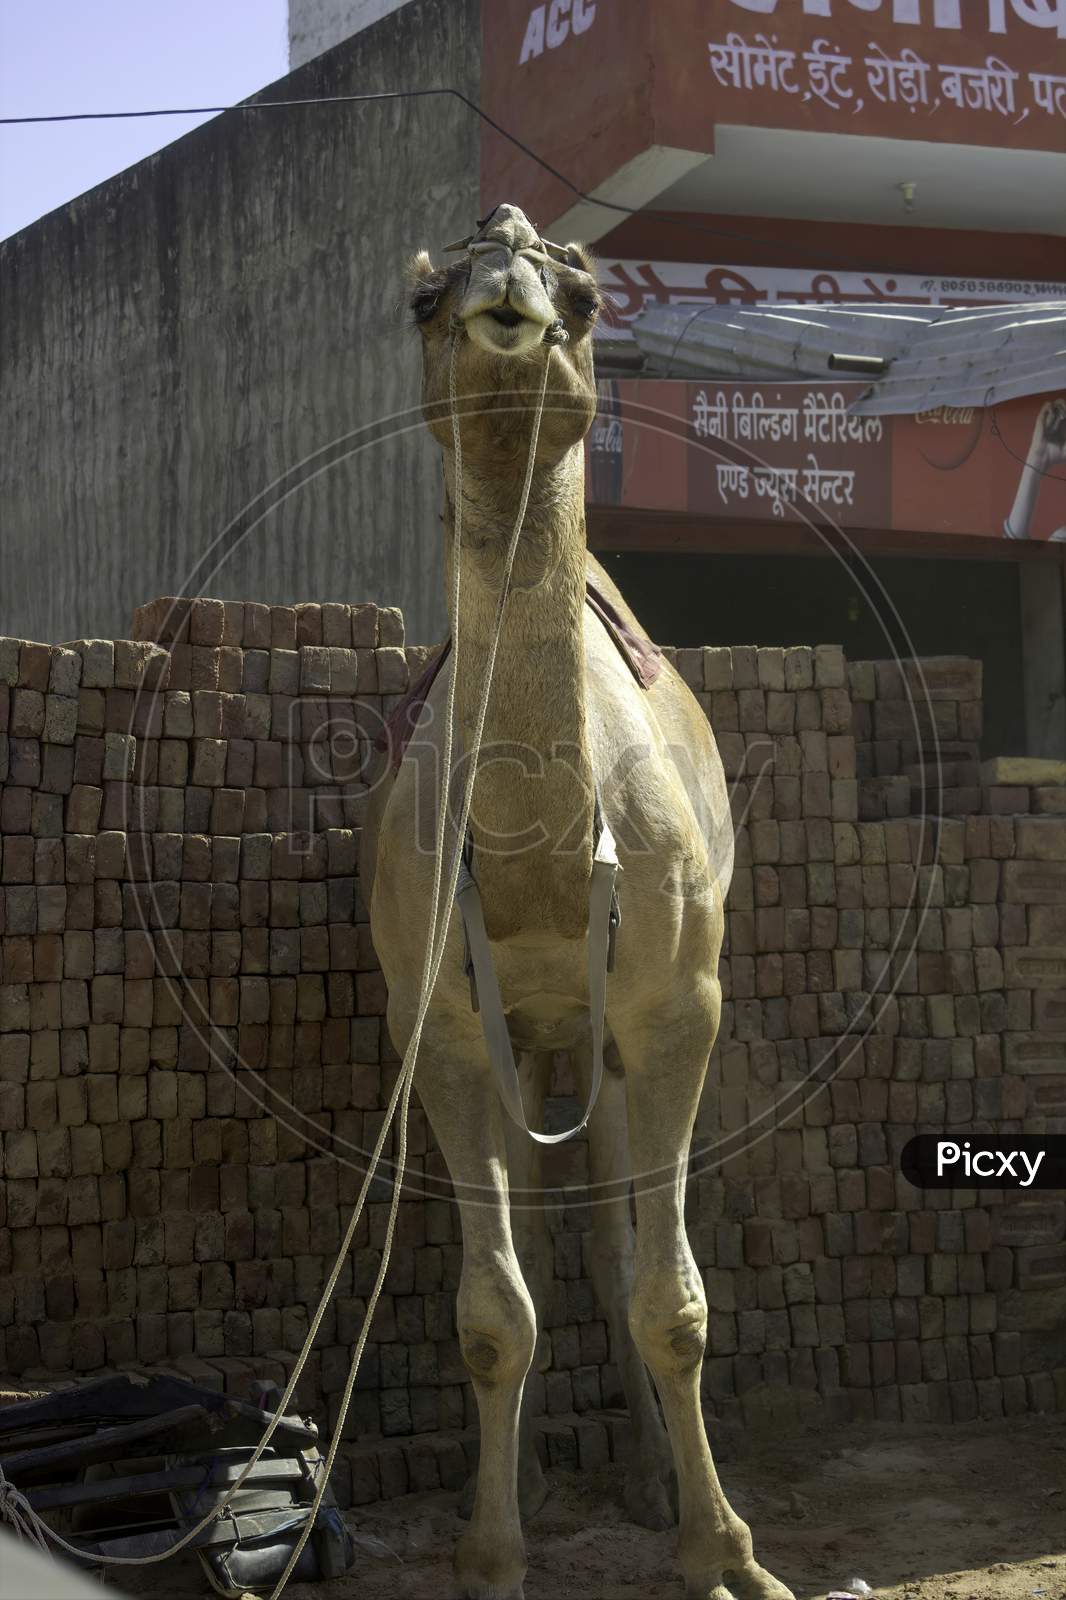 Rajasthan, India - October 06, 2012: A Front View Of A Domestic Camel In Rajasthan Tied In Front Of A Commercial Shop